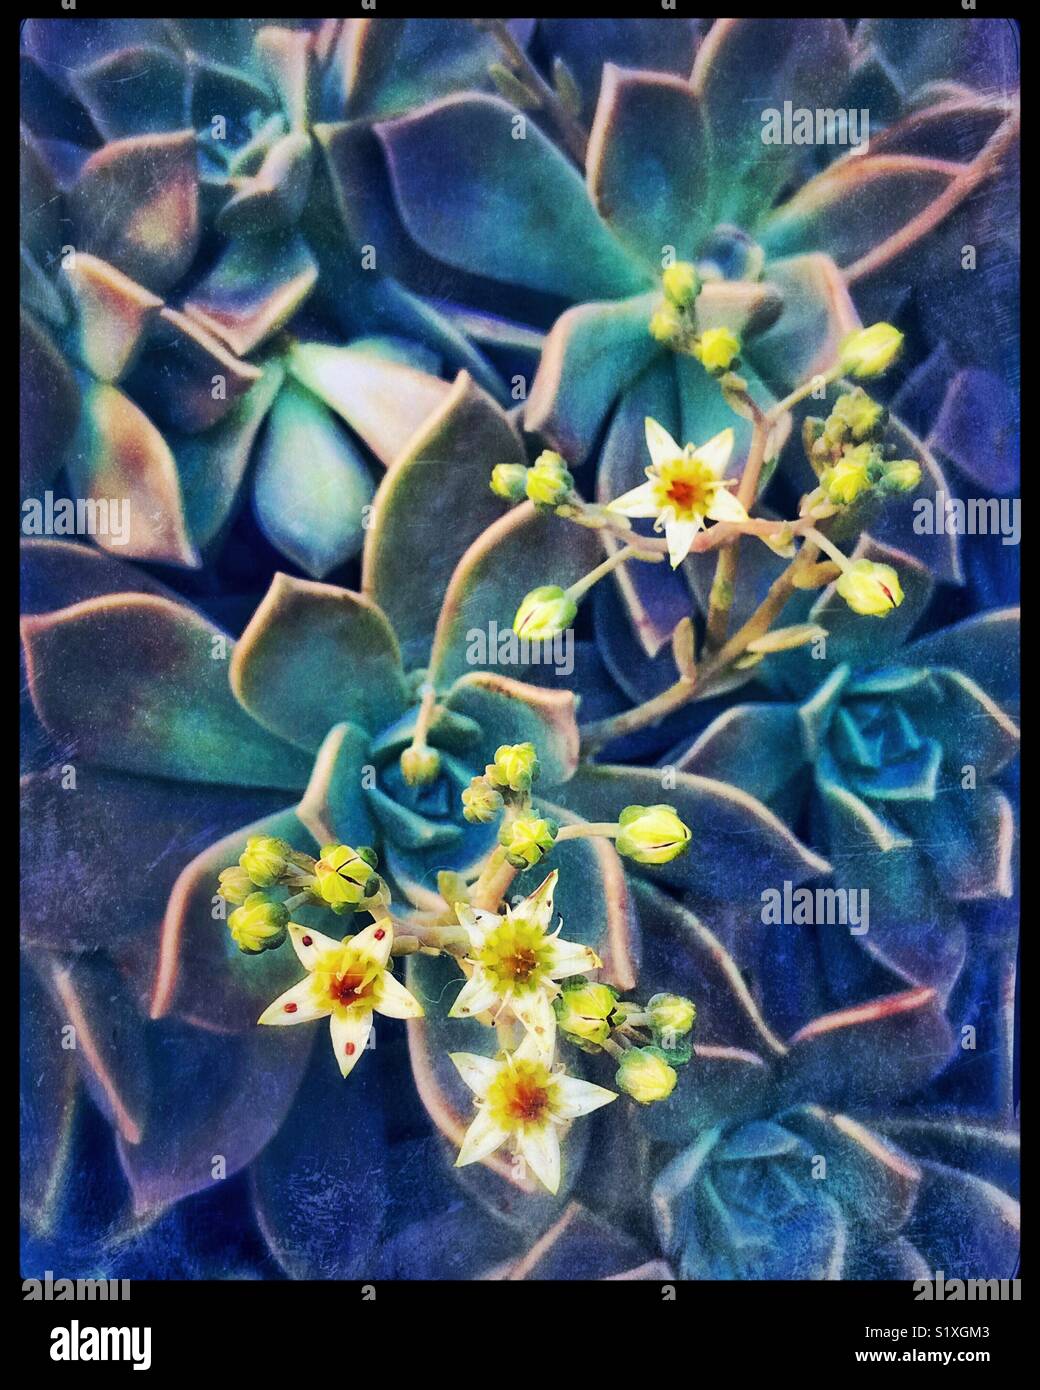 A succulent bursts into bloom with dainty little flowers with a red dot on each petal. Stock Photo